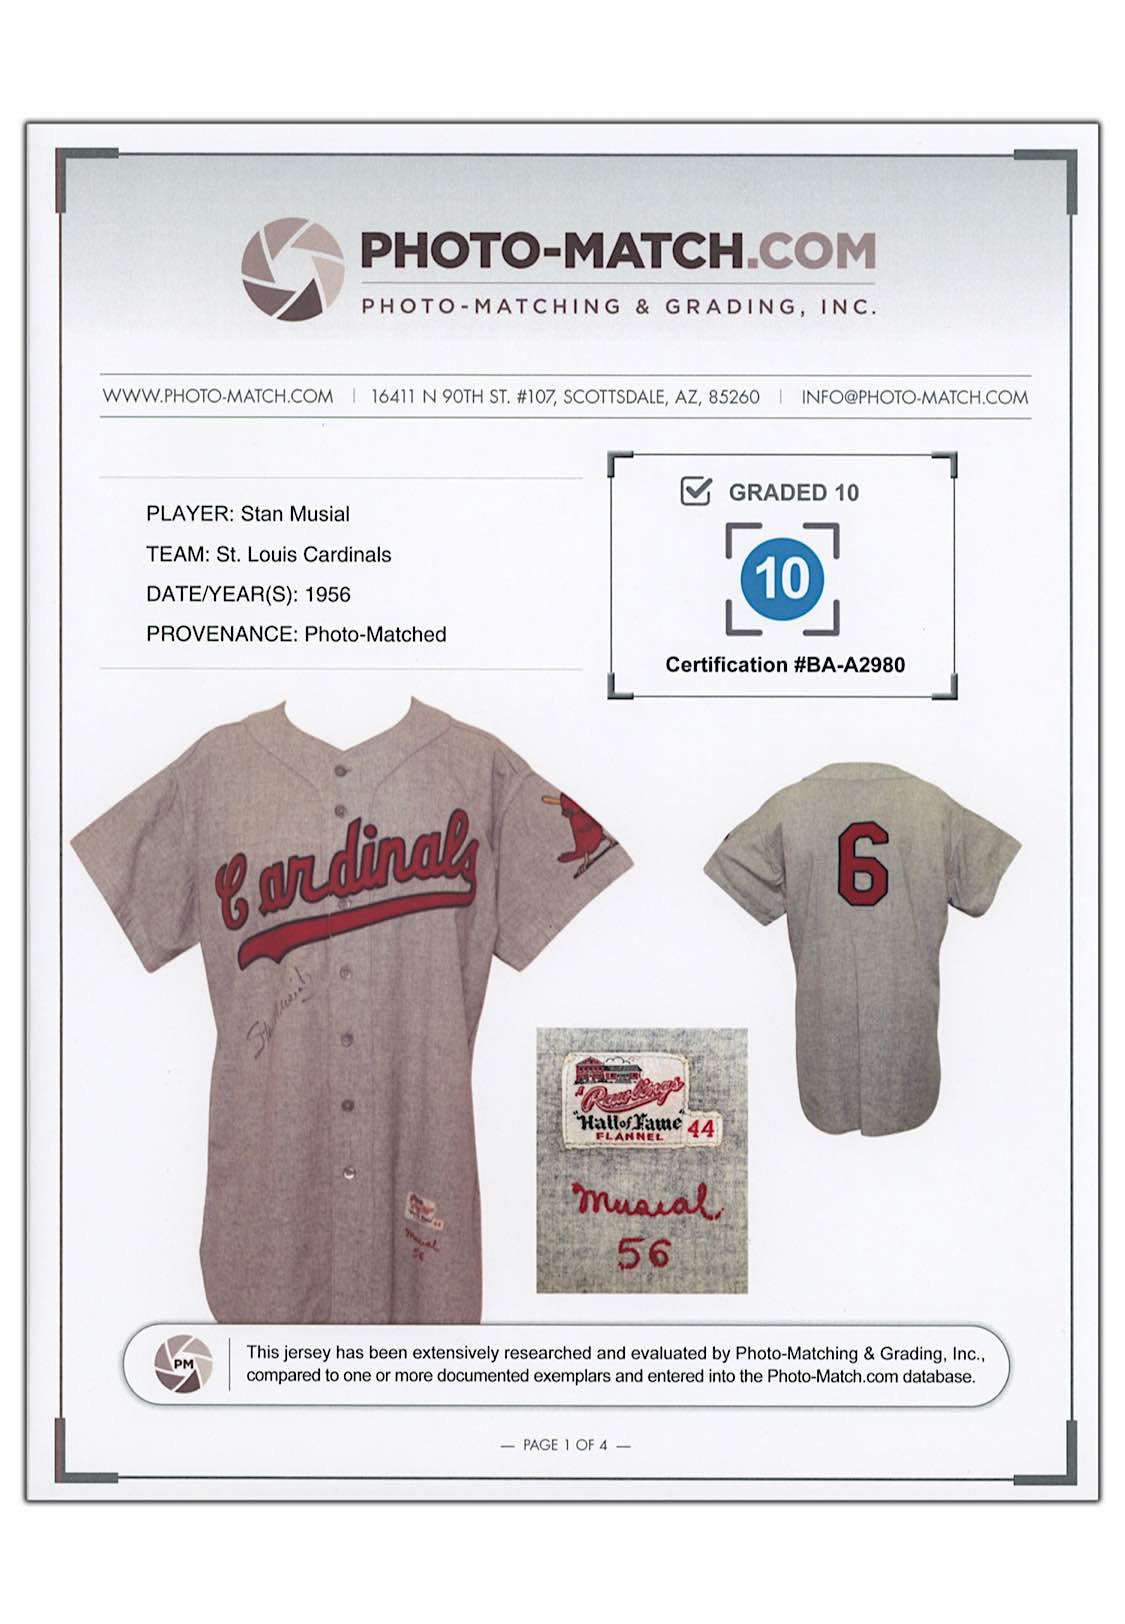 Lot Detail - 1956 Stan Musial St. Louis Cardinals Game-Used & Autographed  Road Flannel Jersey (Photo-Matched & Graded 10 • One Year Style • PSA/DNA &  JSA LOAs)